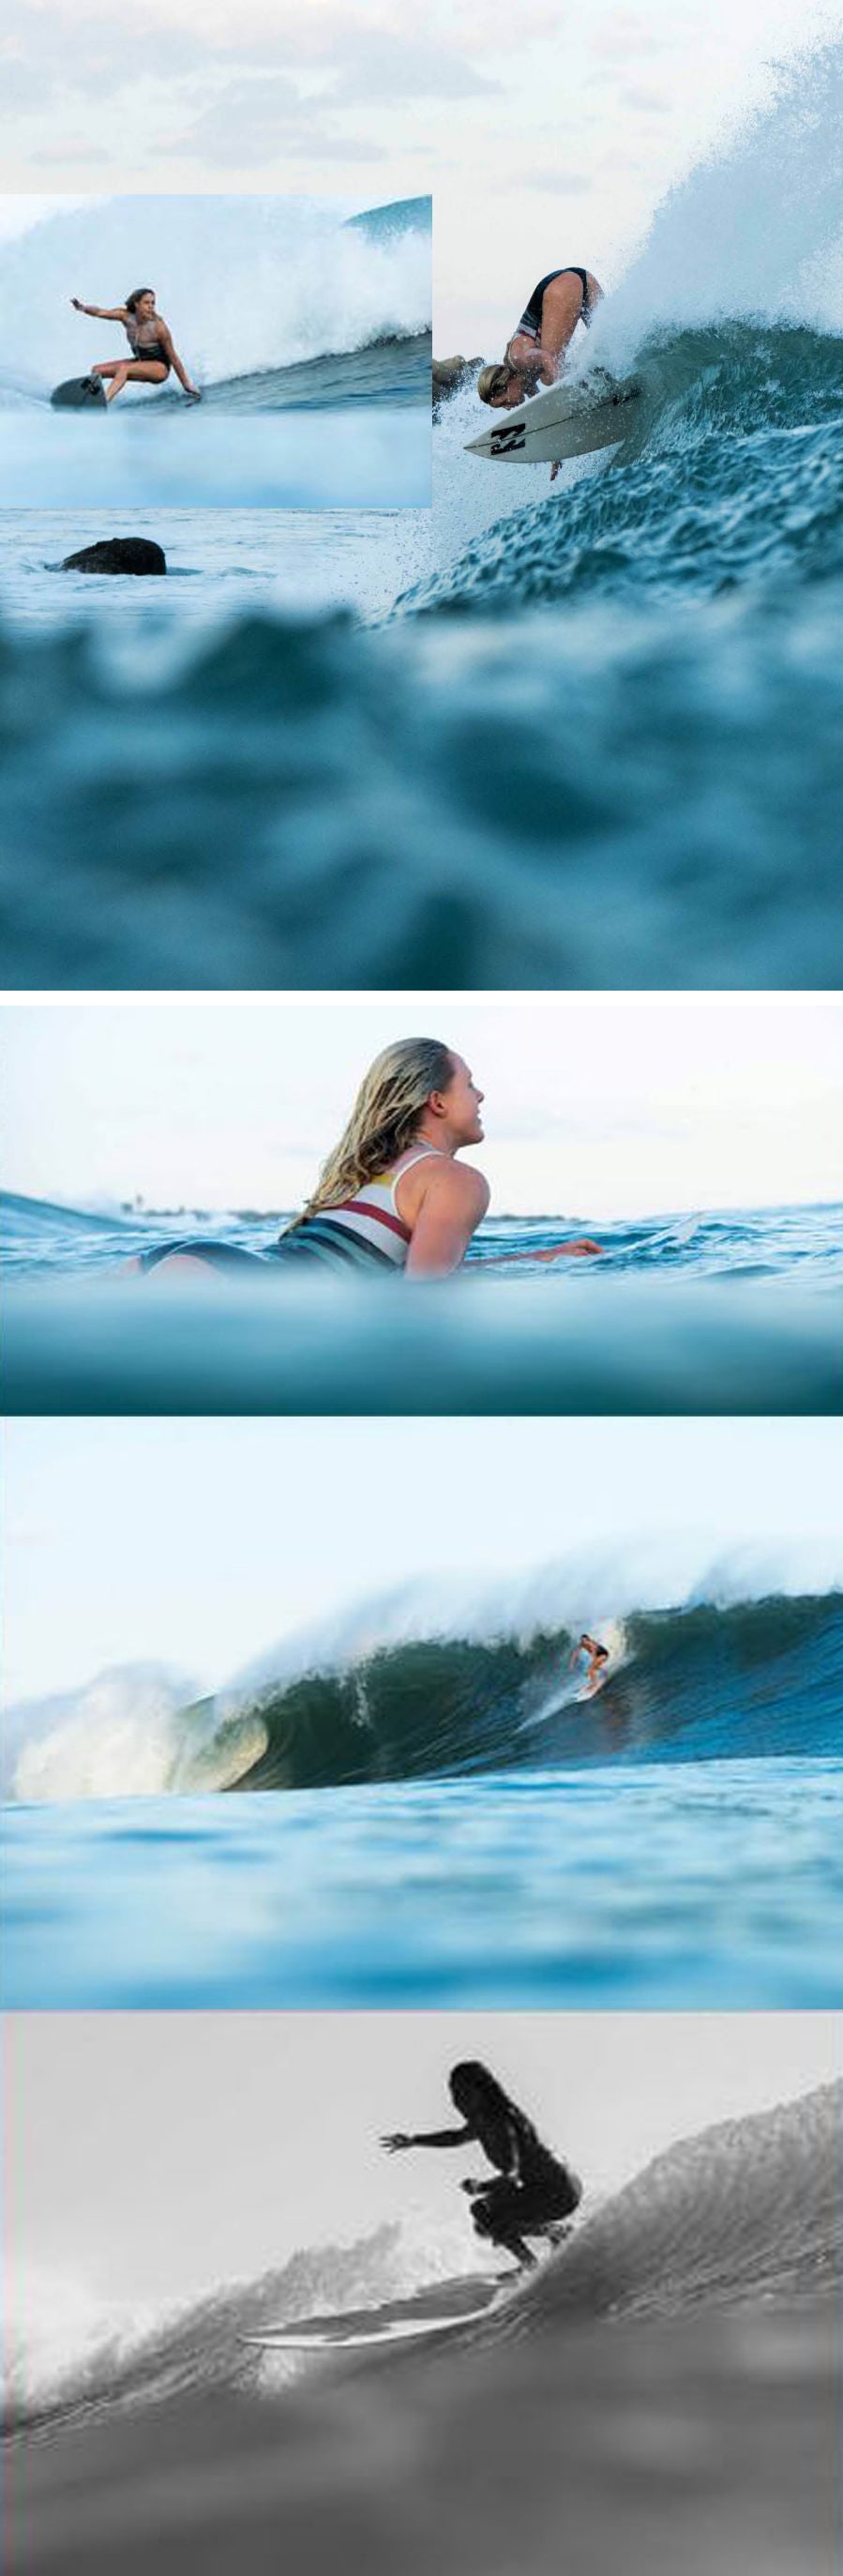 Billabong Women's Know The Feeling Japan 2020 Collection